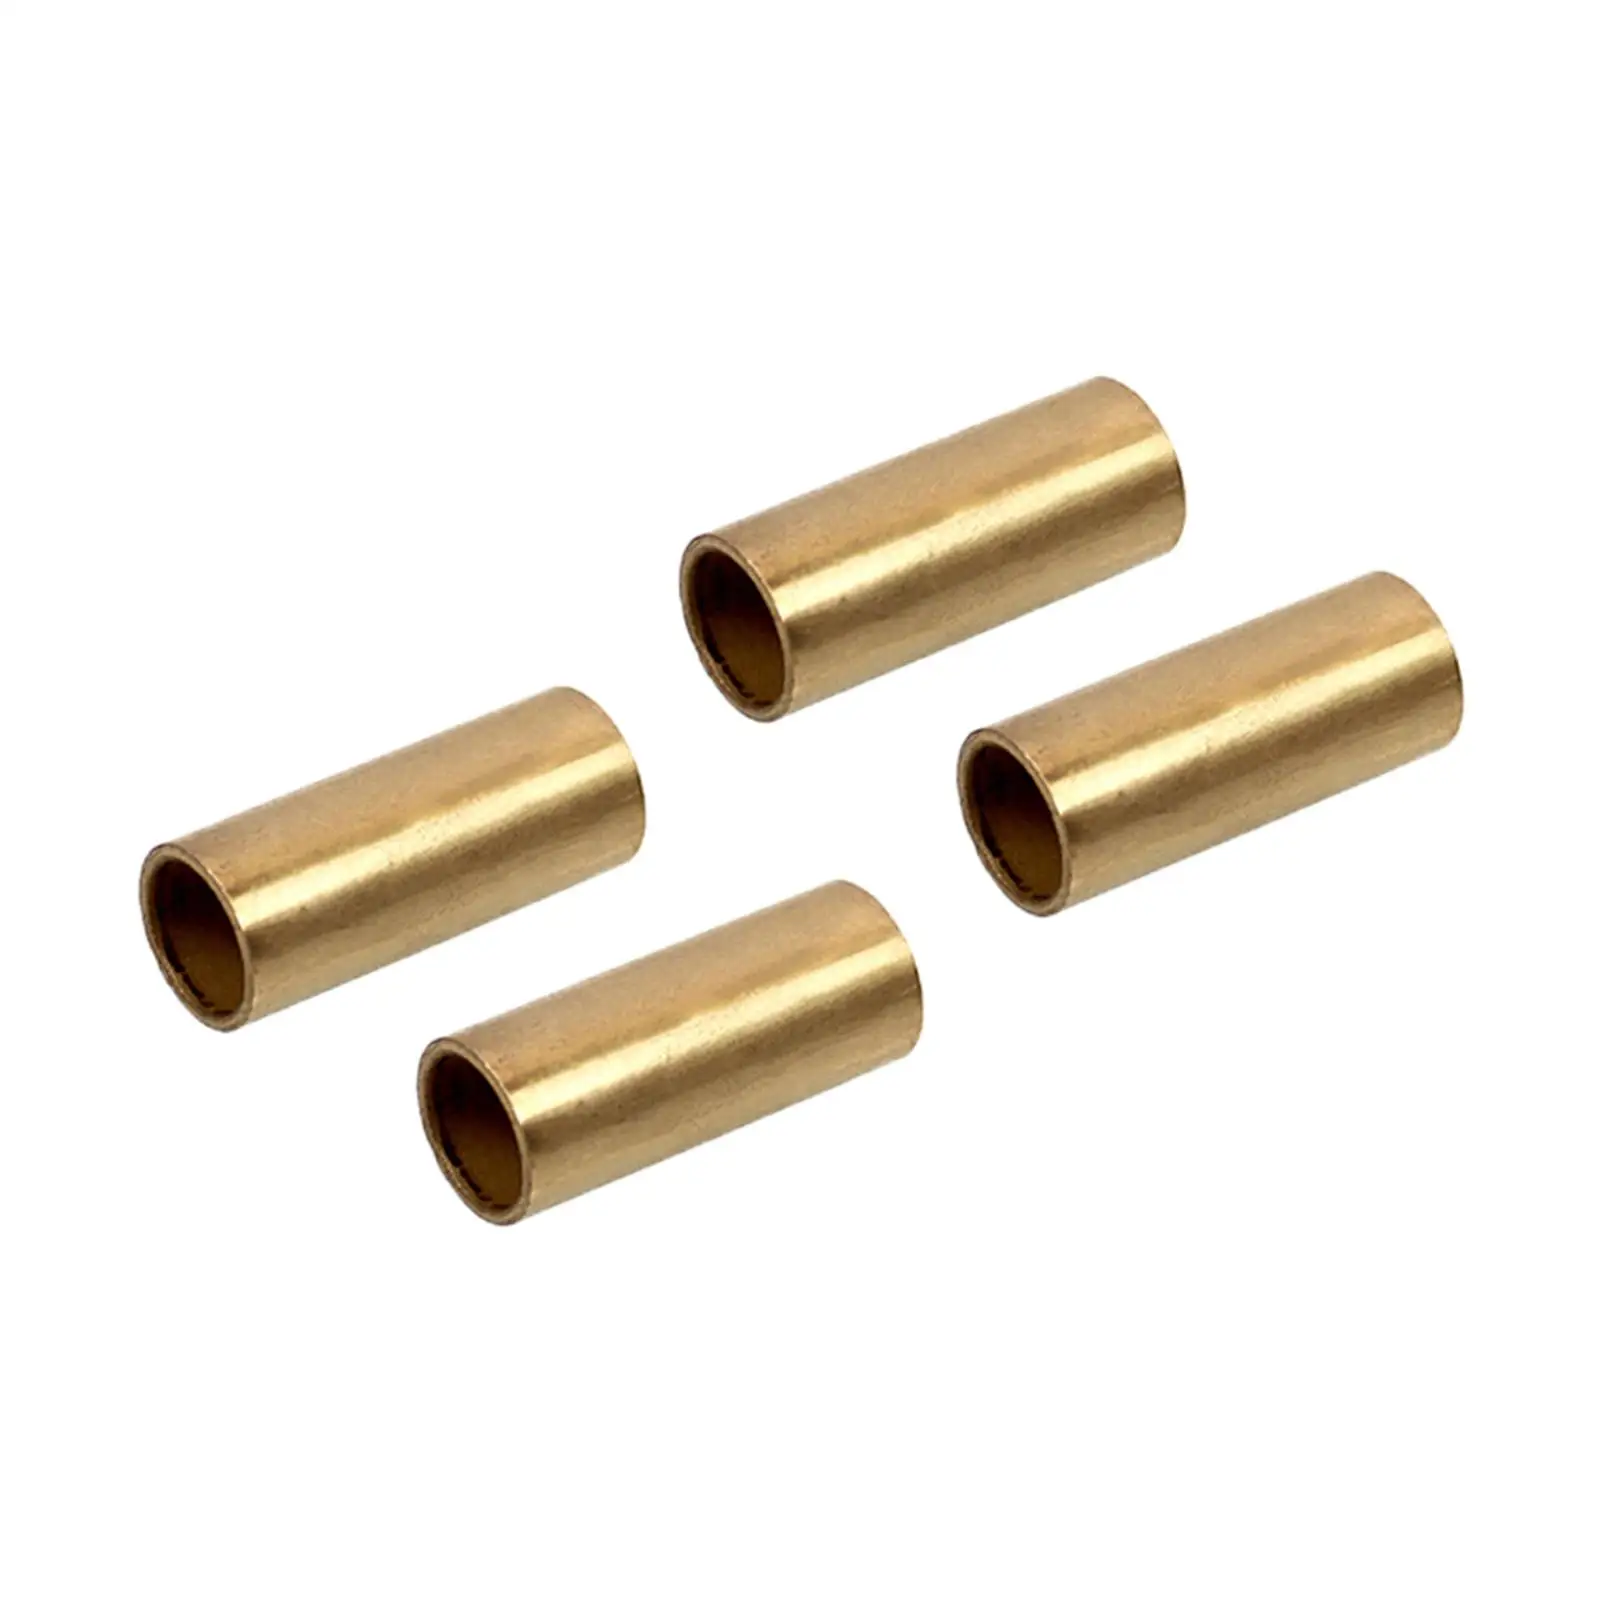 4x Bronze Leaf Spring Shackle Bushings K71-291-00 Direct Replaces Strong Parts